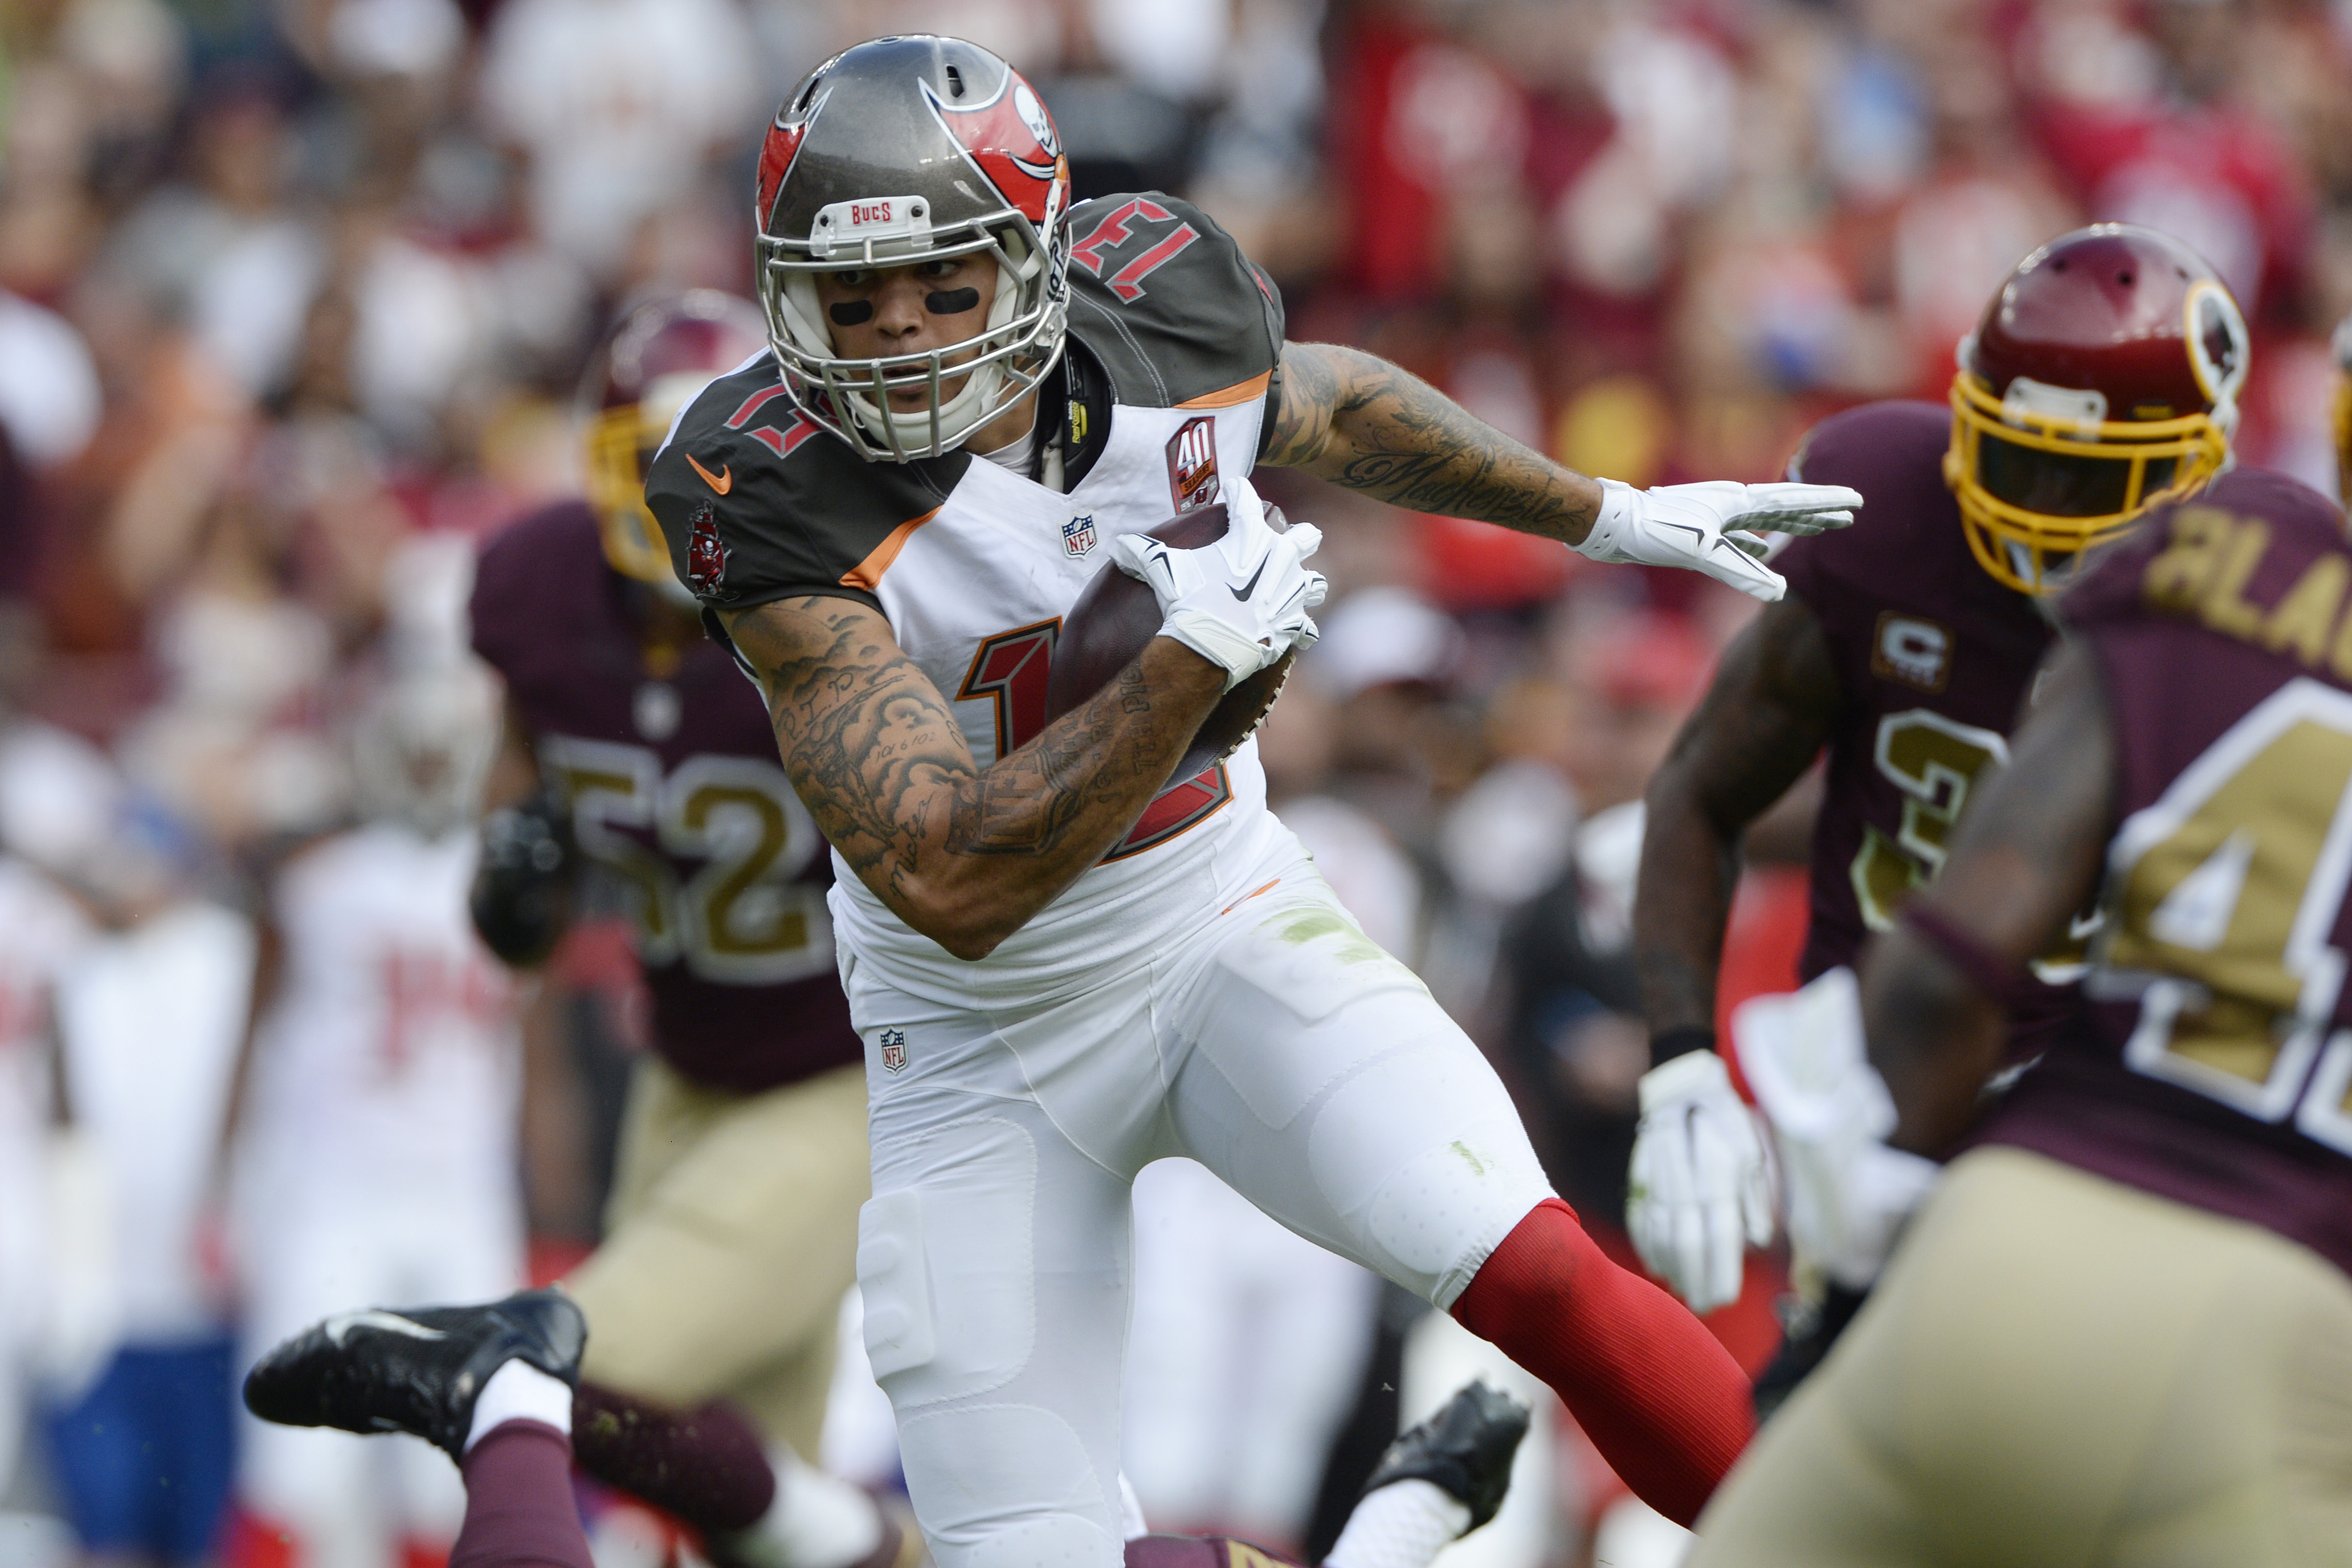 Tampa Bay Buccaneers wide receiver Mike Evans (13) runs after the catch during the first quarter against the Washington Redskins at FedEx Field